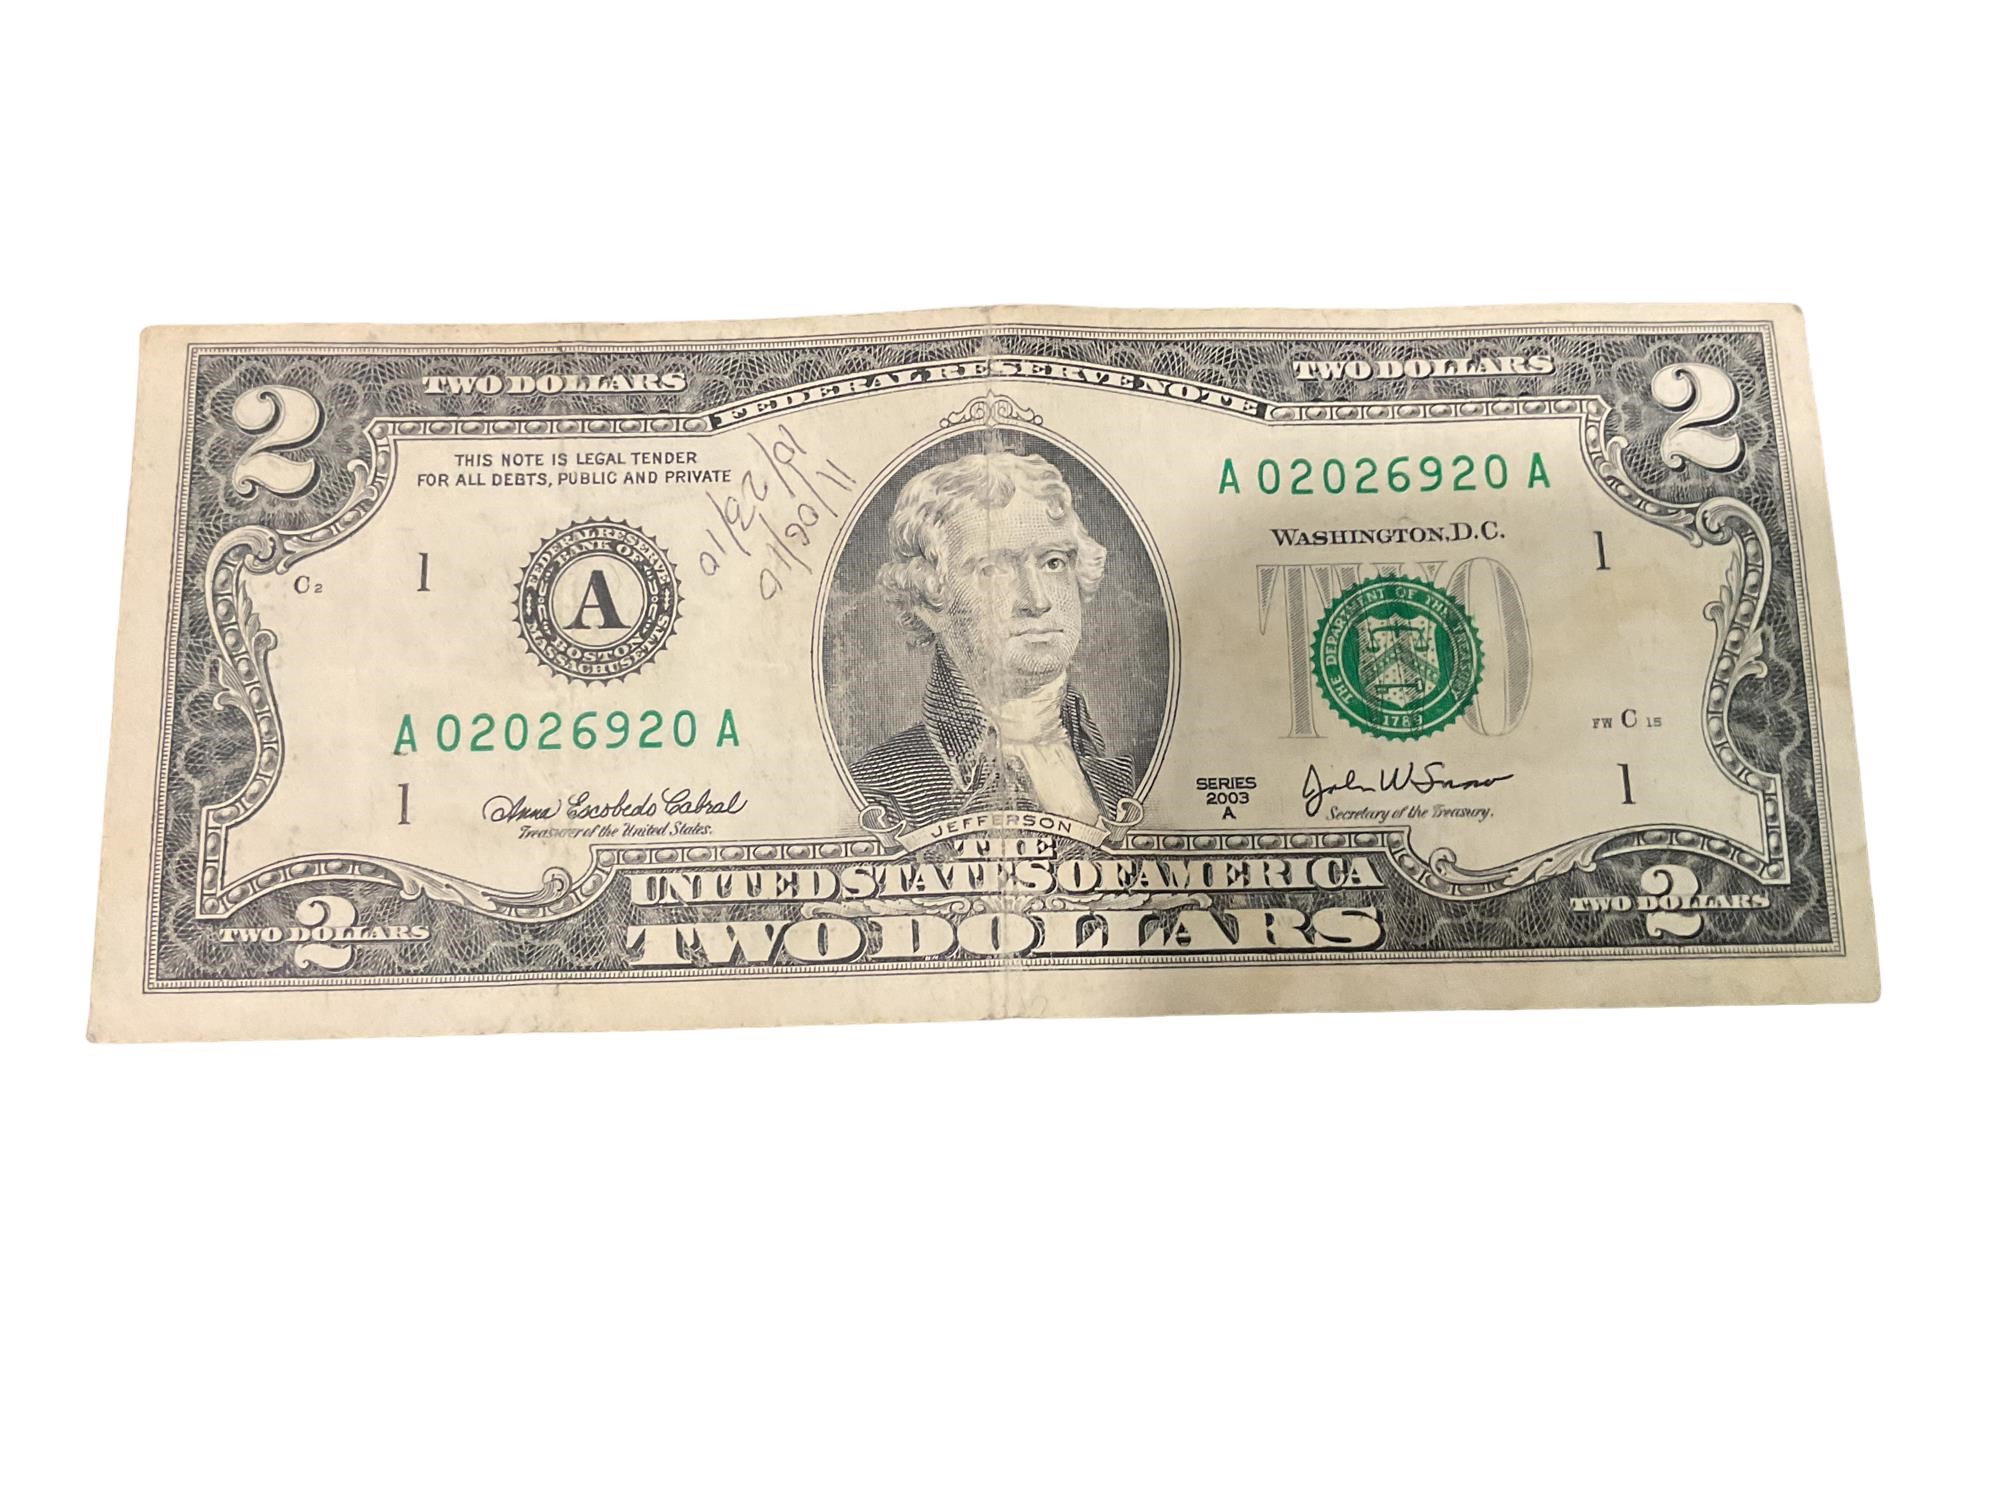 2003 Series A $2 Bill w/ Unique Serial Number